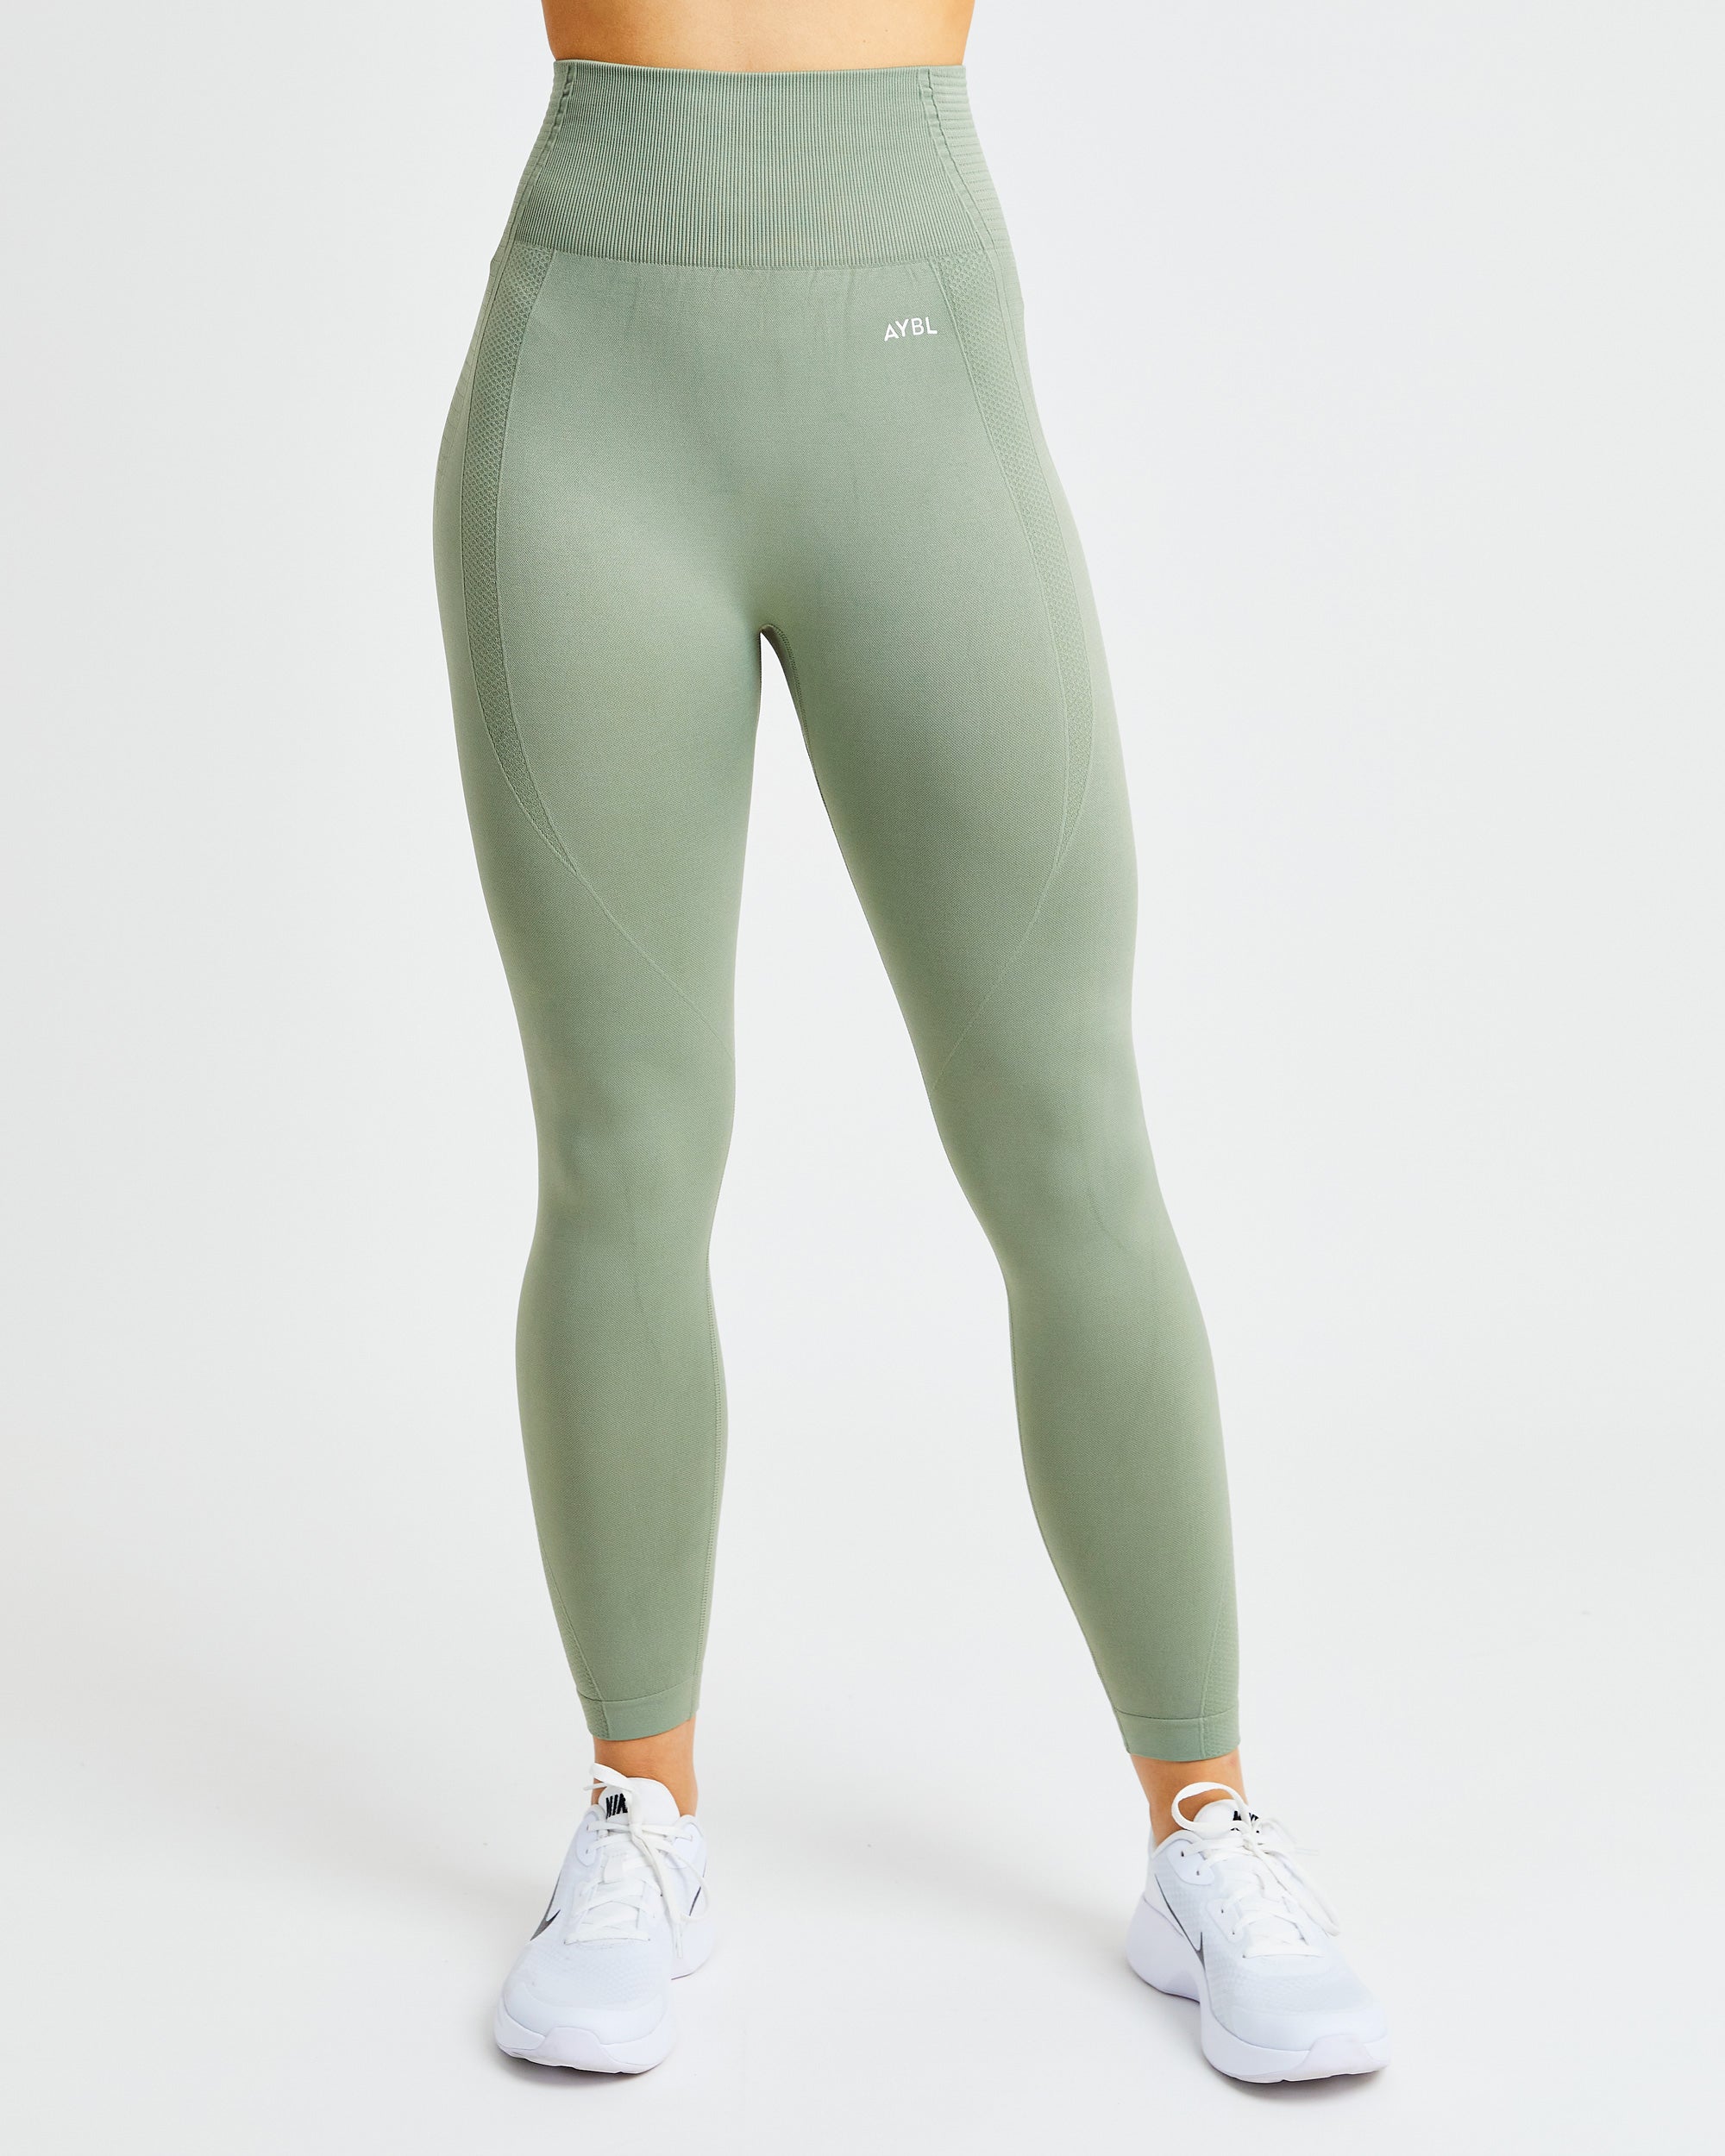 Balance Collection Solid Green Leggings Size M - 72% off